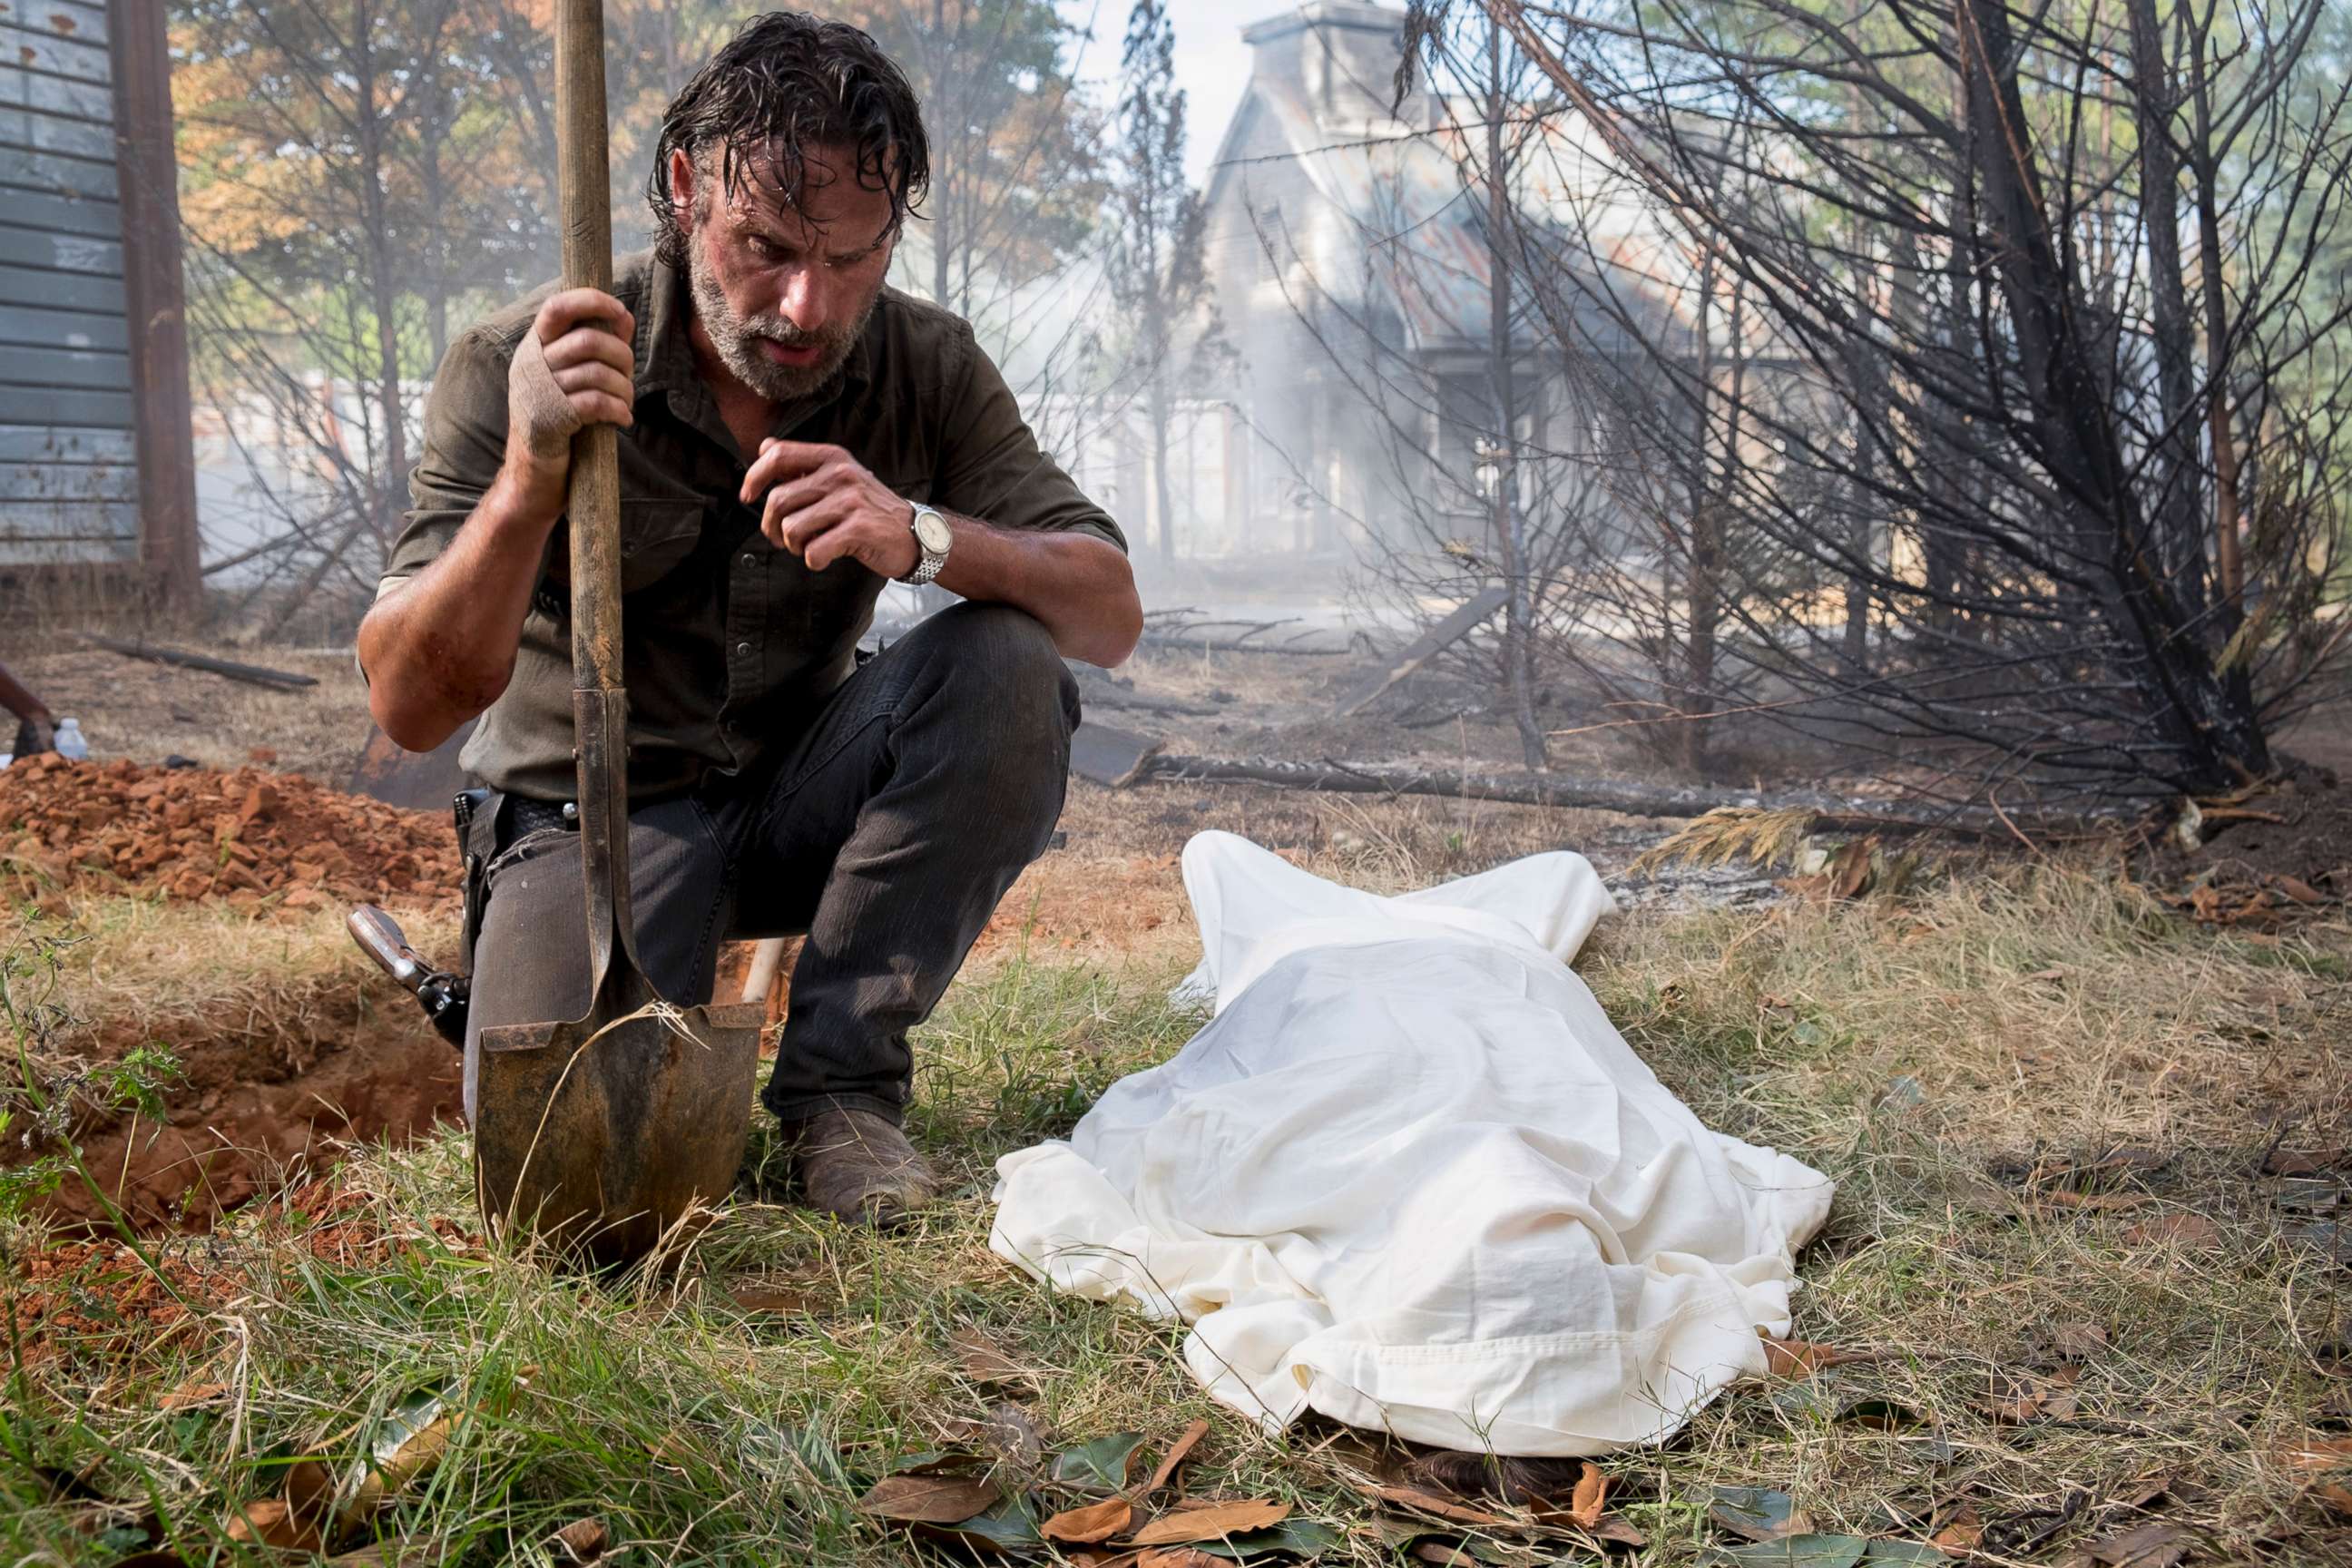 PHOTO: Andrew Lincoln as Rick Grimes in 'The Walking Dead' season 8, episode 9.